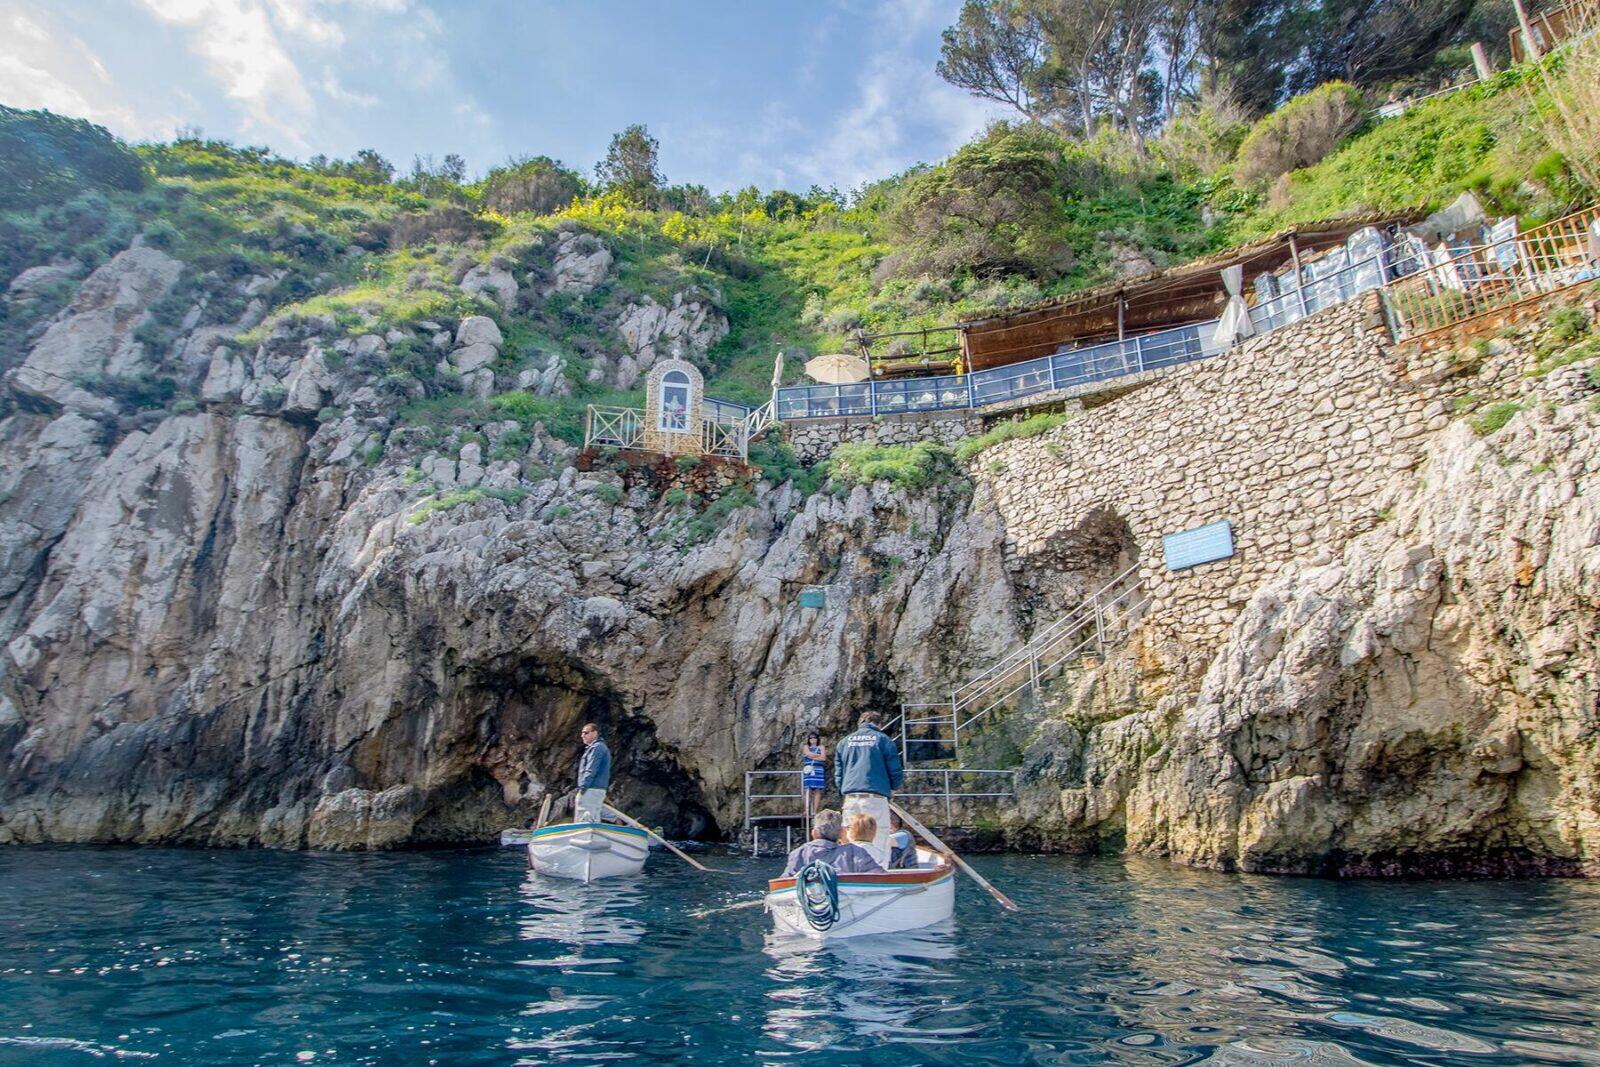 The Best Things to Do and See in Capri, Italy